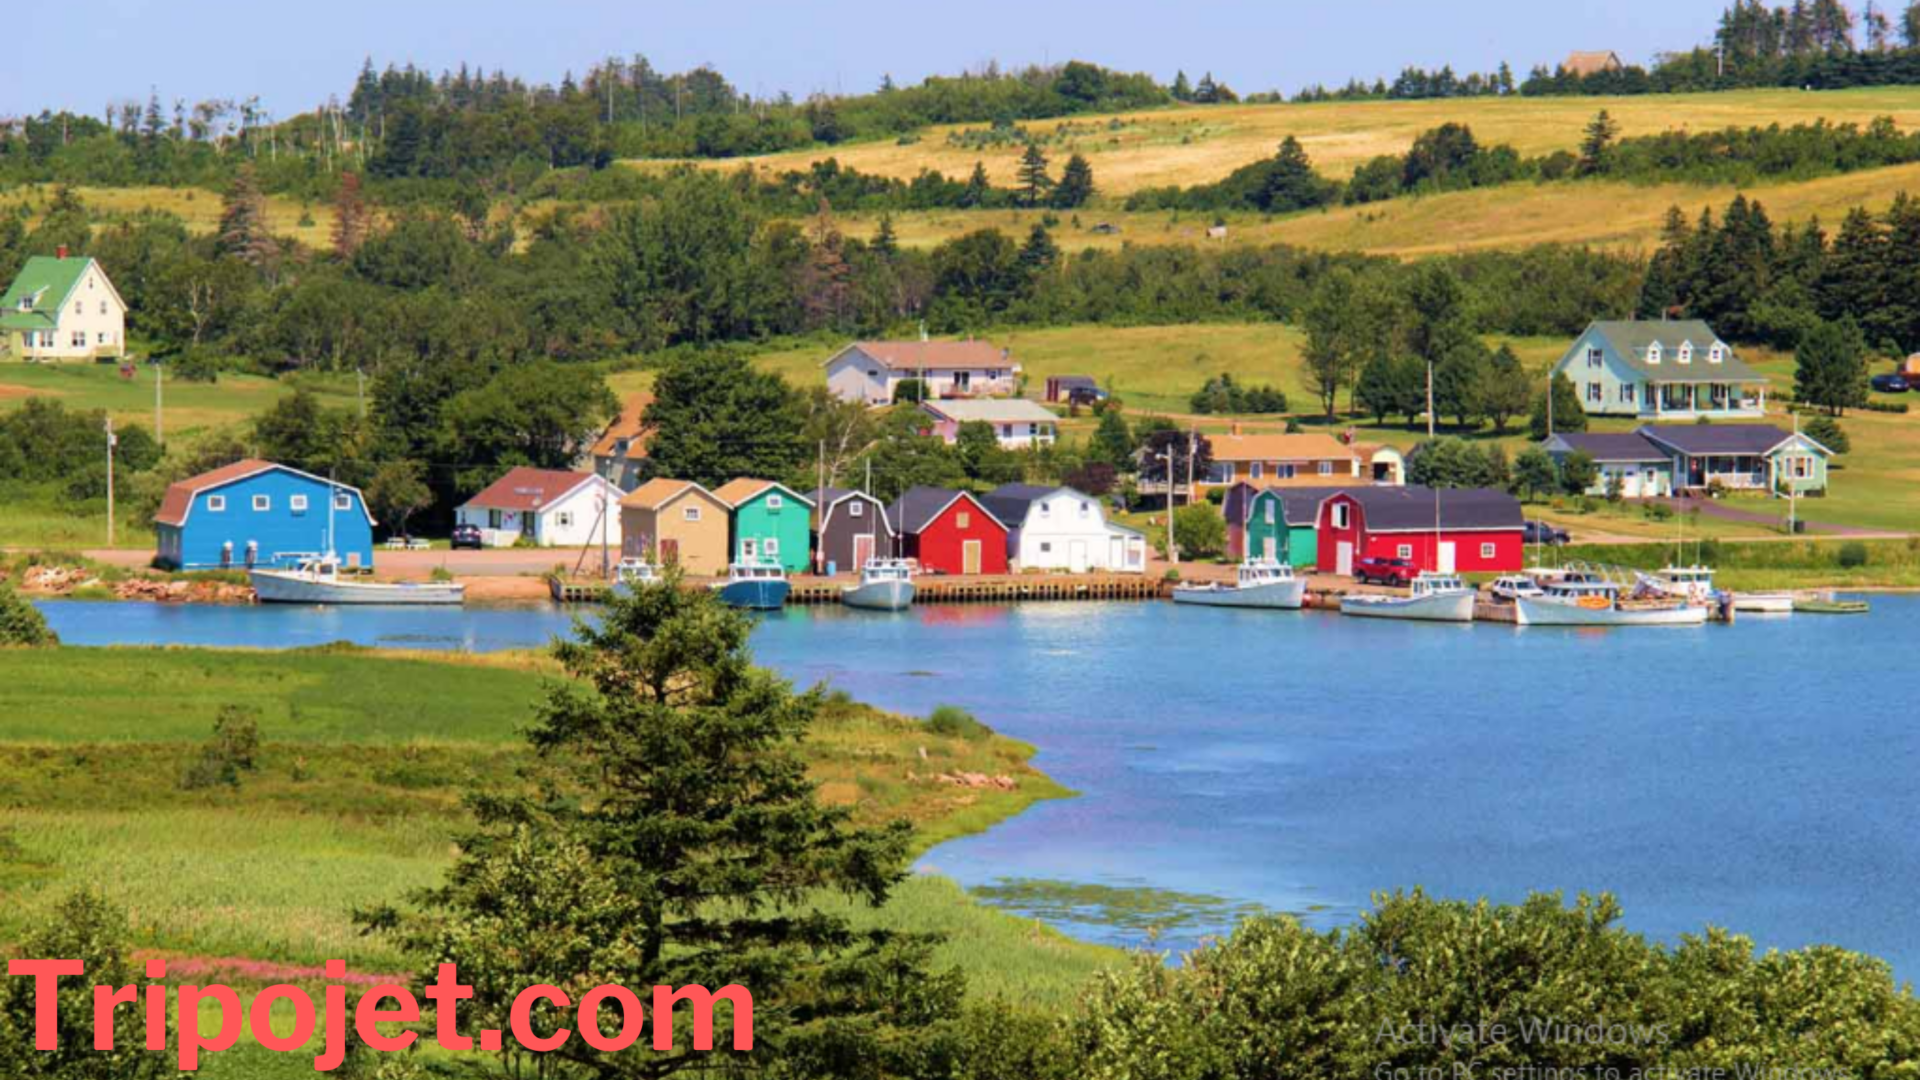 How to get to Prince Edward Island?